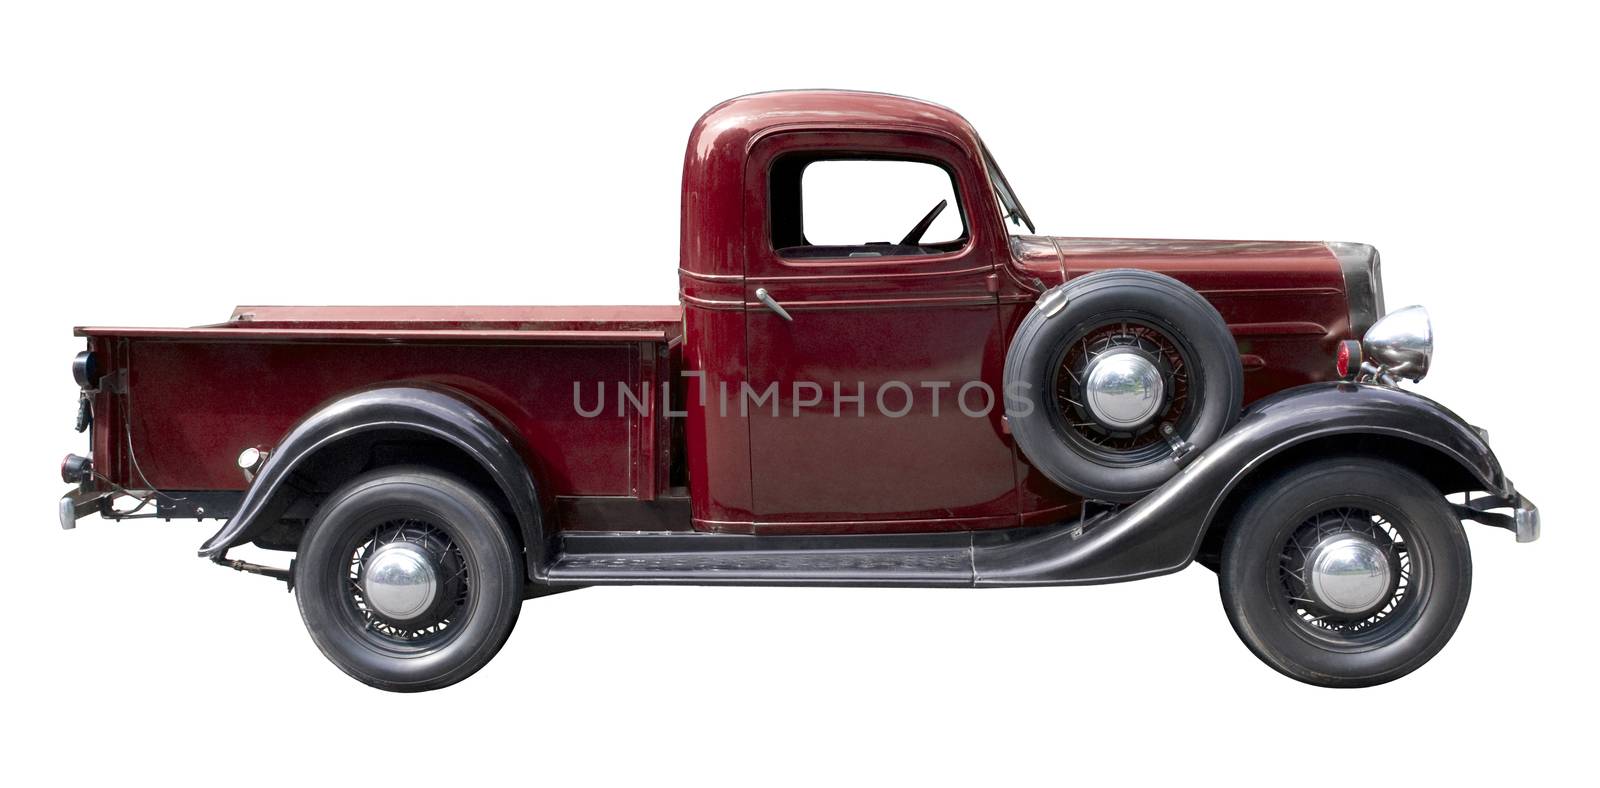 Red vintage pickup truck from 1930s isolated against white background